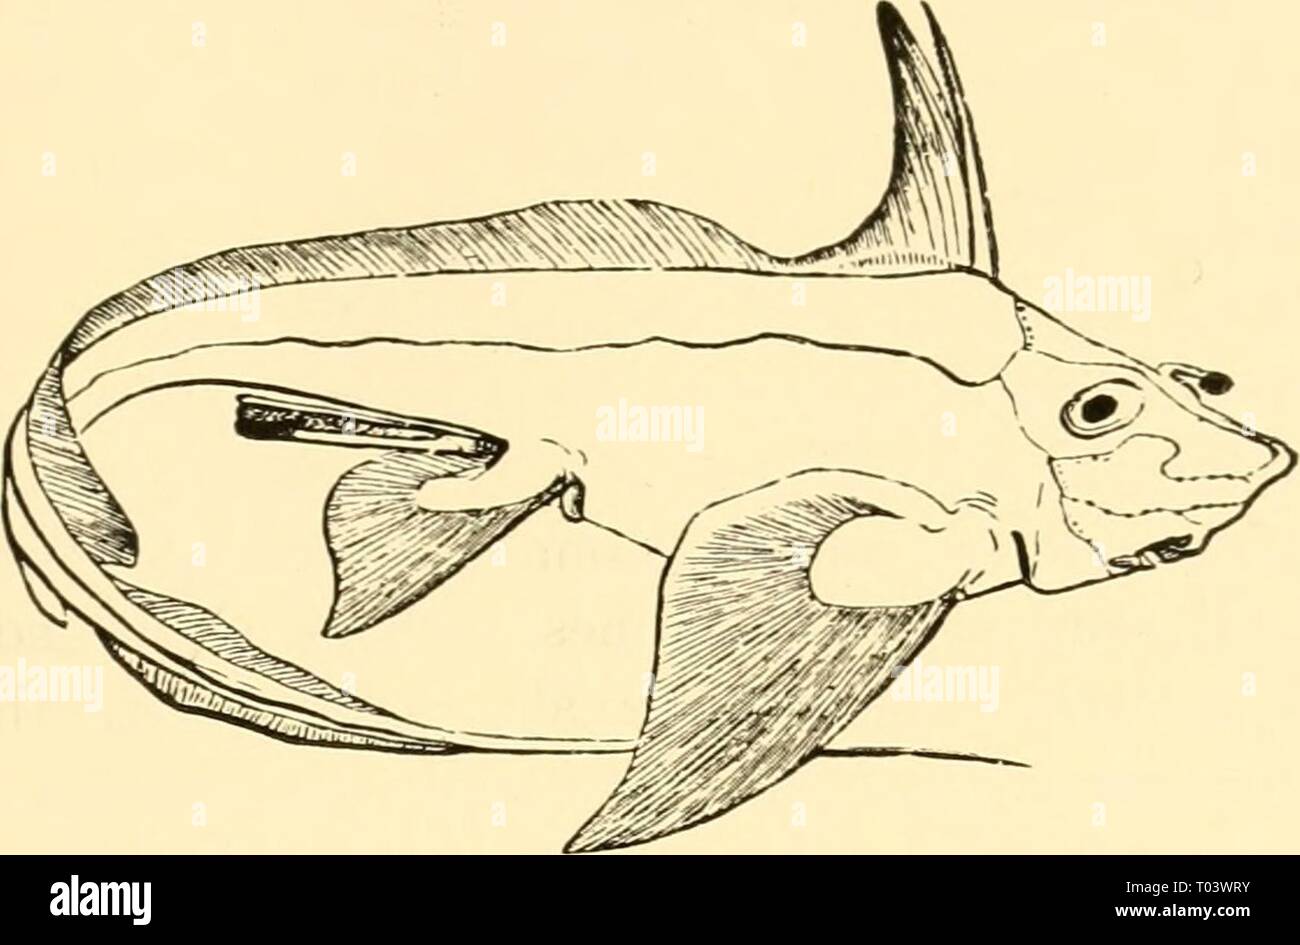 Ecological animal geography; an authorized, rewritten edition based on Tiergeographie auf ockologischer grundlage . ecologicalanimal00hess Year: 1937  ABYSSAL BENTHAL AND PELAGIAL 263 bony fishes, Gigantura, Macruridae (Fig. 74), and Gastrostomidae, are characteristic of the abyssal waters. Band-like compressed forms such as the deep-sea shark, Chlamydoselachus, and the fishes Regalecus and Trachypterus, are likewise characteristic of the depths, in correlation with their weak powers of locomotion. The absence of water movement    Fig. 73.—Chimaera montrosa. After Boas. also makes possible the Stock Photo